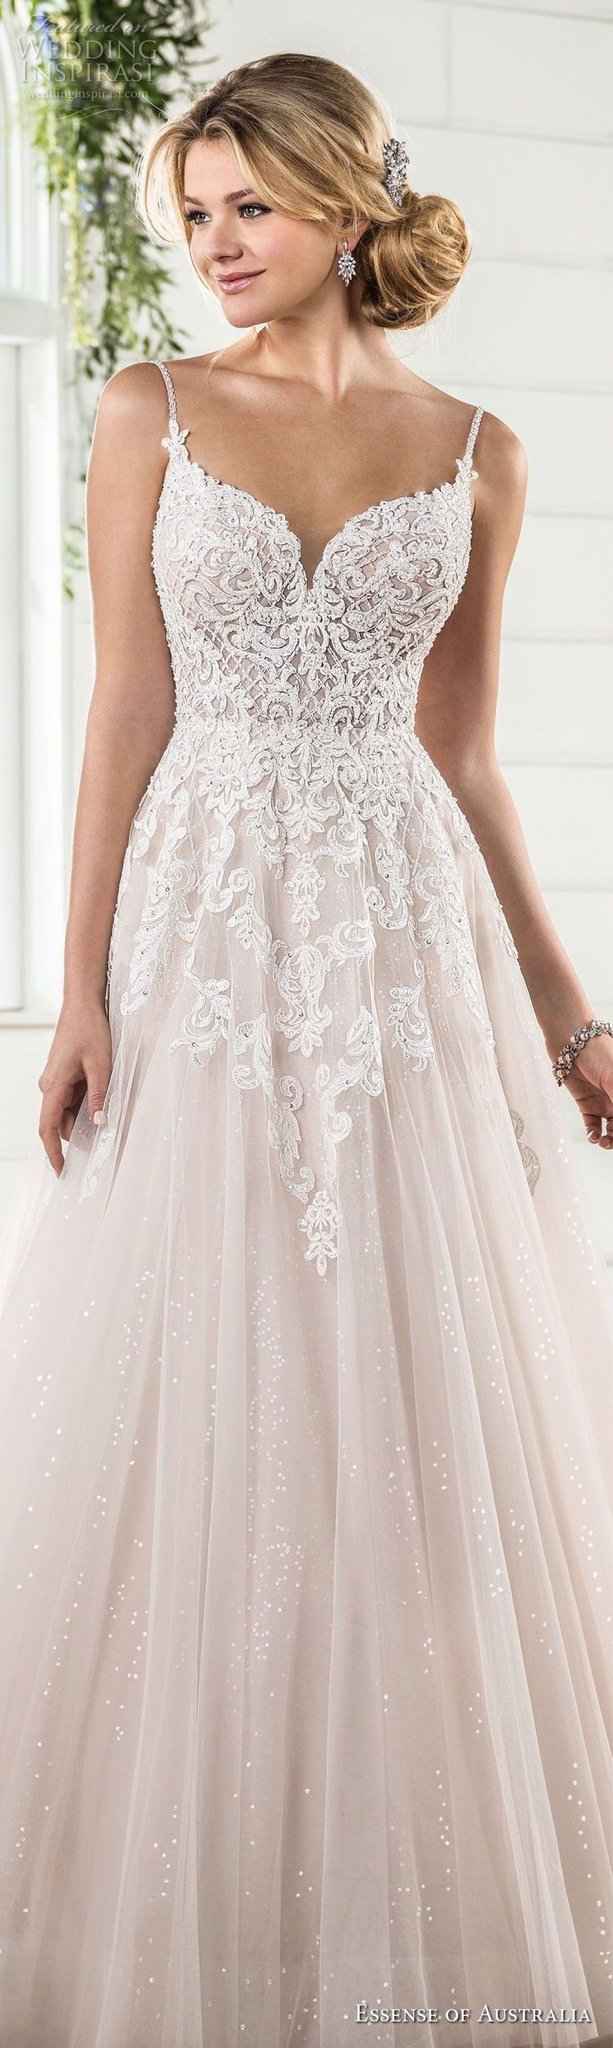  Bridesmaid dress colour with blush gown? - 1